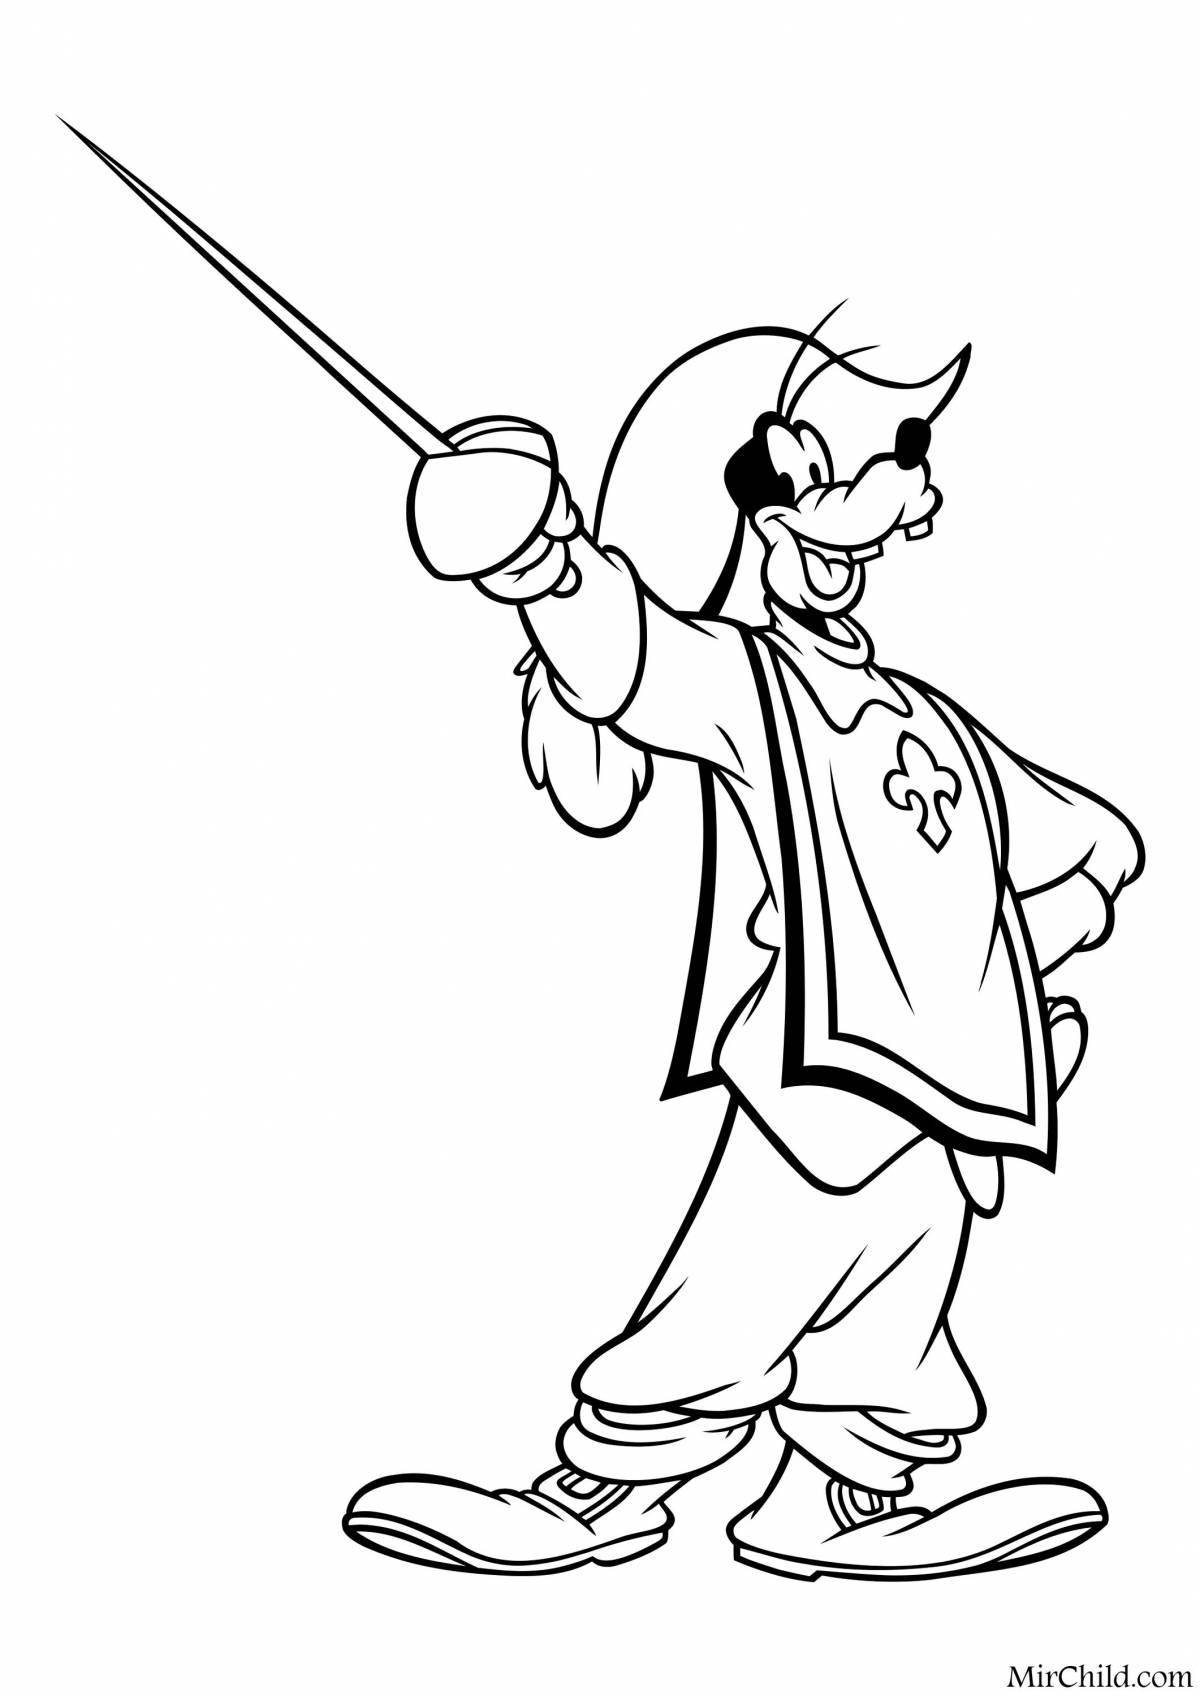 Animated musketeer coloring pages